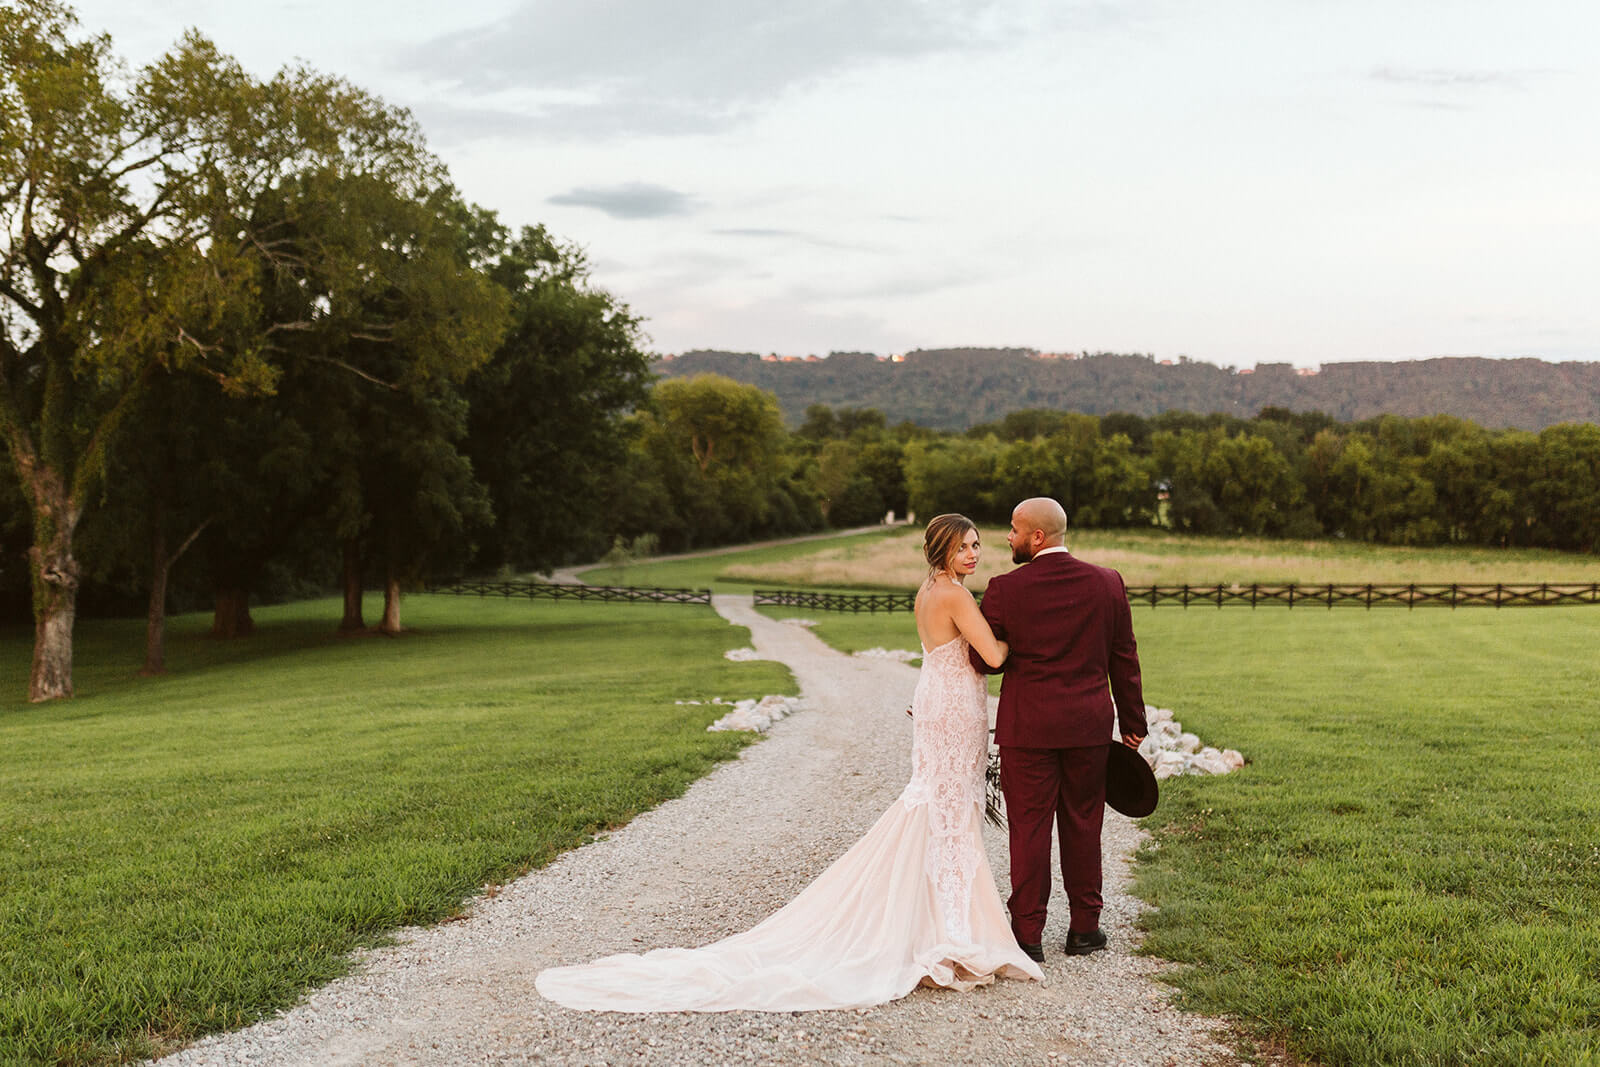 A bride and groom walk arm-in-arm down a gravel road through an open field.